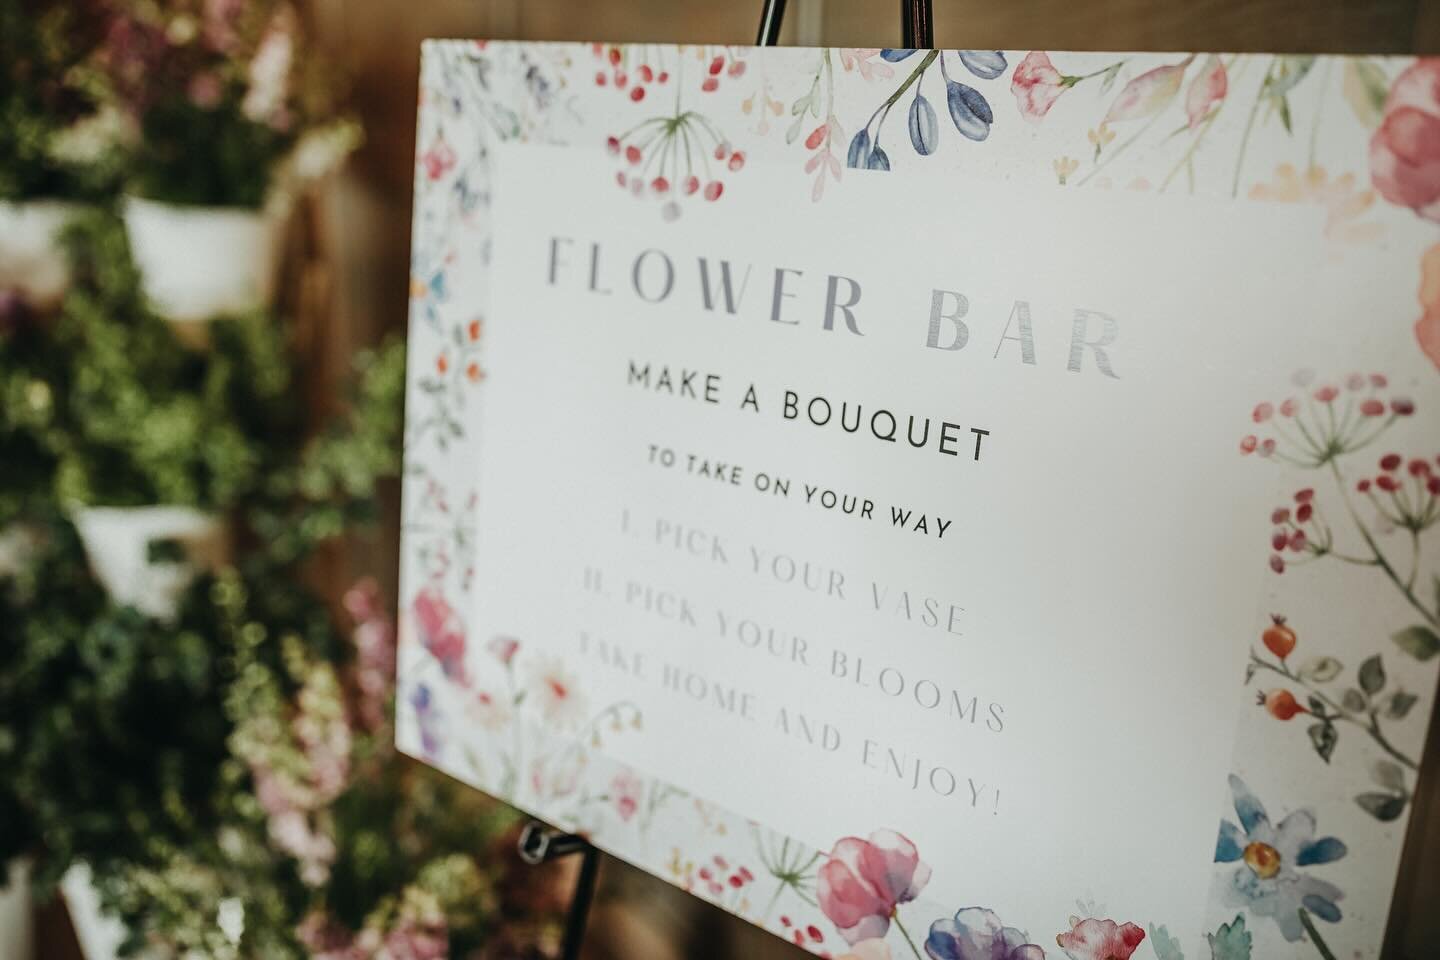 If you want a unique and interactive experience, a bouquet bar is such a fun option! 
They&rsquo;re the perfect activity for a bridal or baby shower and make a great takeaway favor your guests can enjoy for days! 

Photography: @jc.photog_ 
.
.
.
.
.